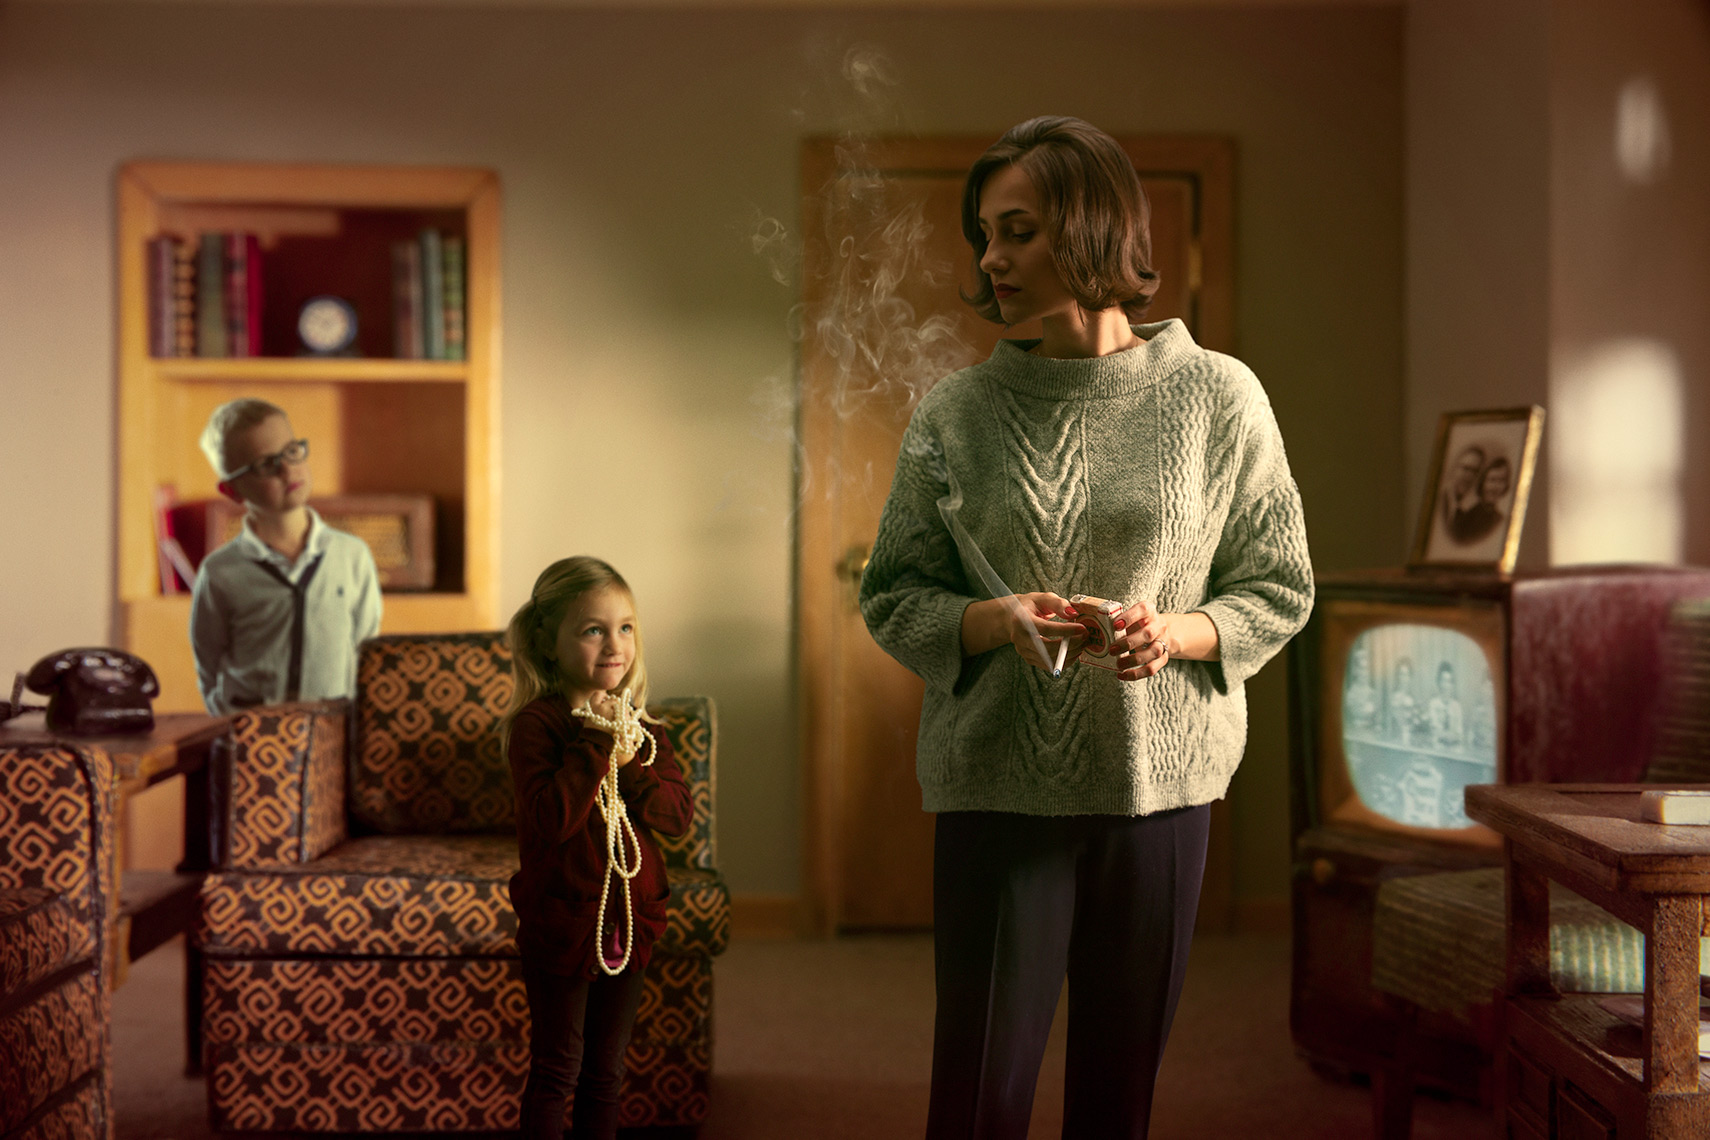 1960s re-creation of distracted mother smoking in suburban living room as her two children look on.